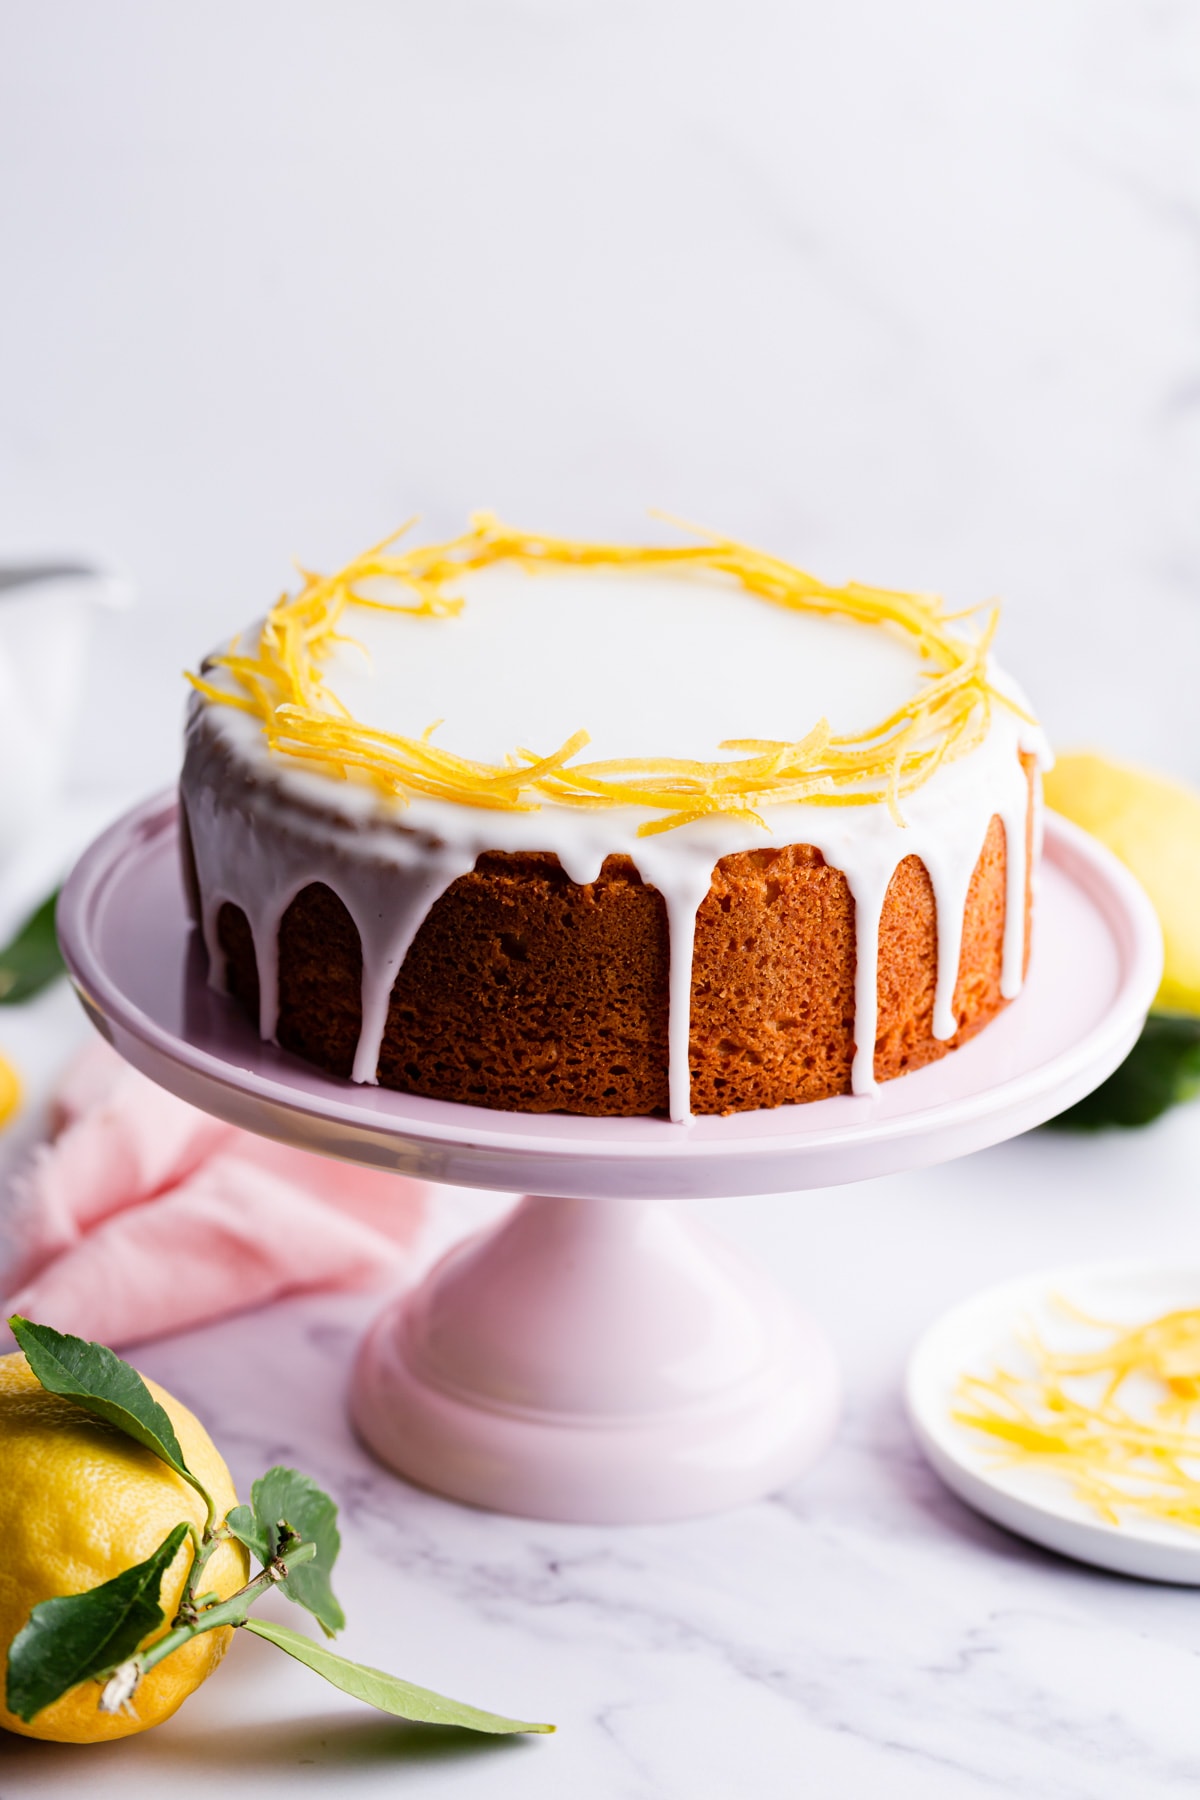 45 degree angle view of the zesty lemon cake on pink cake stand